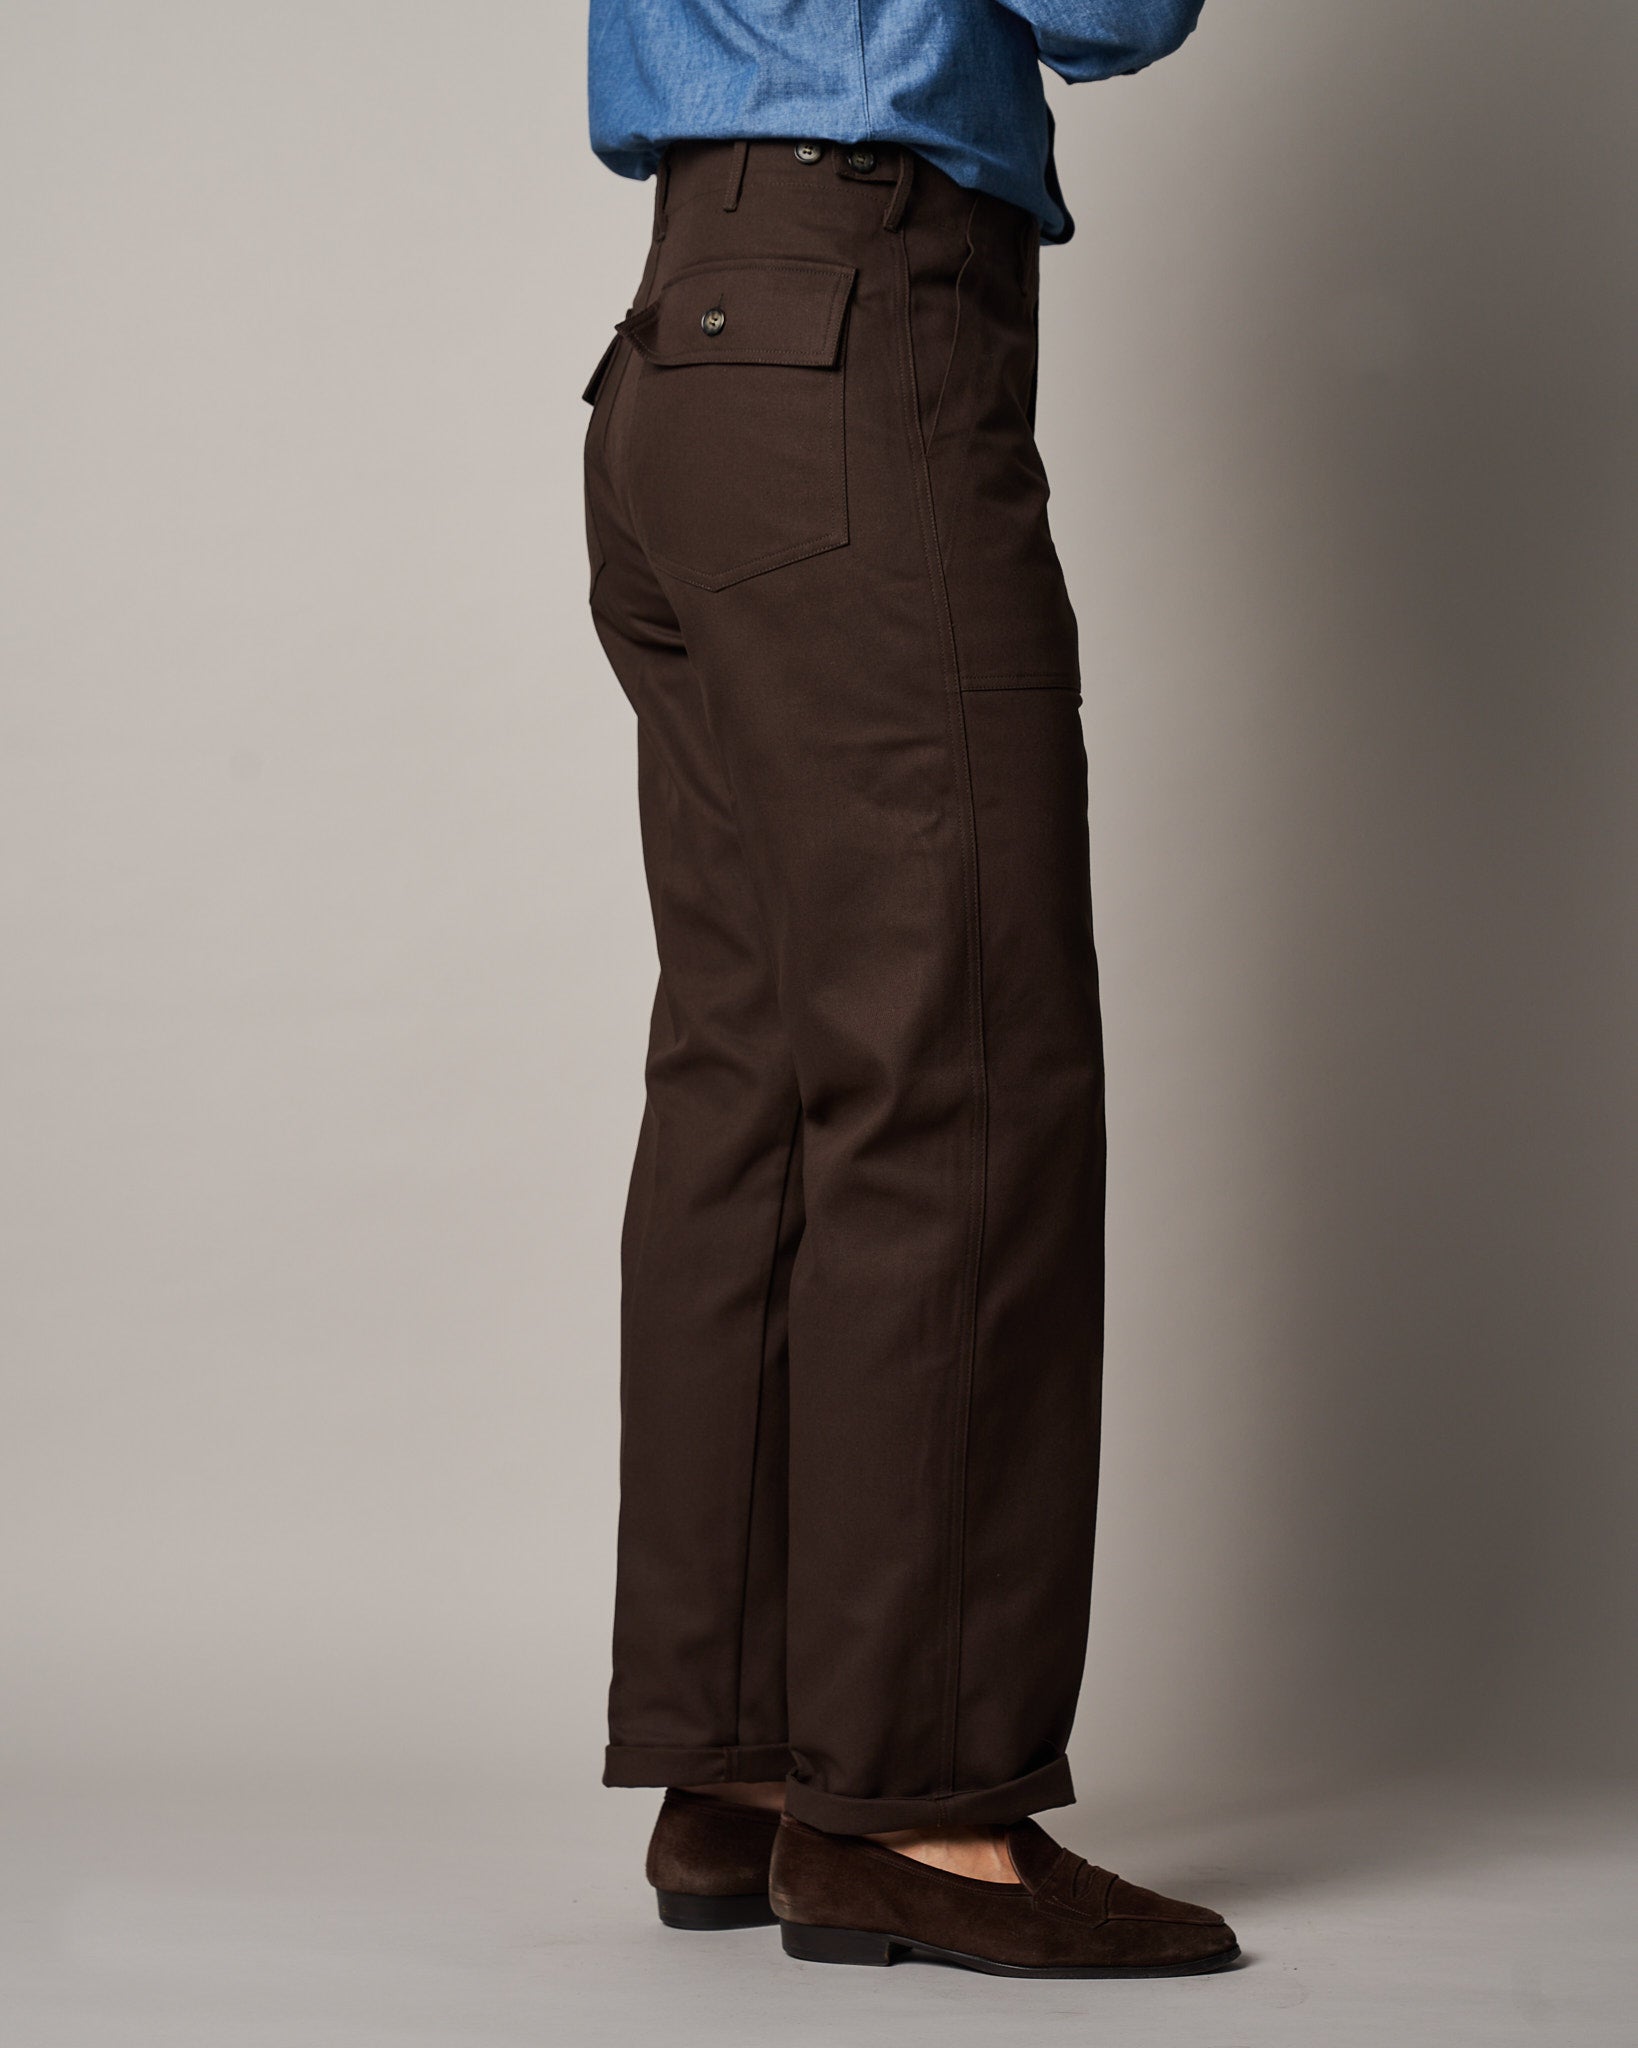 T107 Fatigue Pants - Chocolate (Pre-Order)